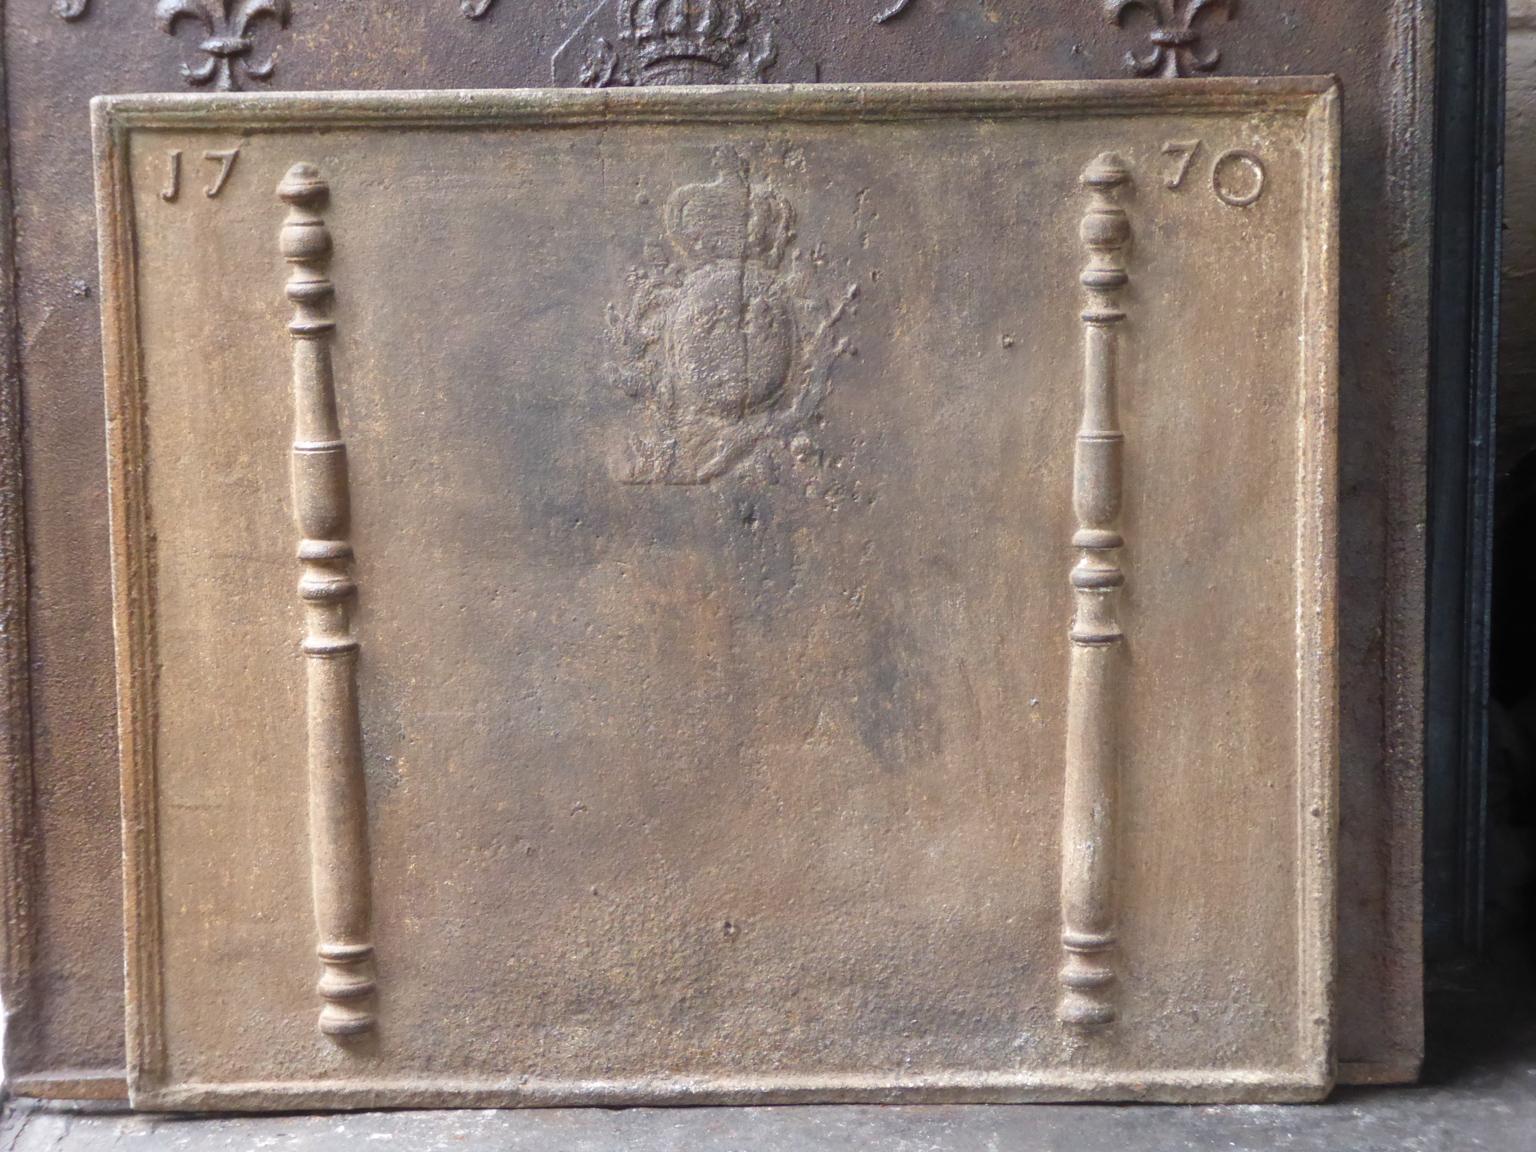 Beautiful 18th century French Louis XV fireback with the arms of France. The Arms of France are flanked by two Pillars of Hercules, which symbolize strength and the unknown. The date of production of the fireback, 1770, is also cast in the fireback.